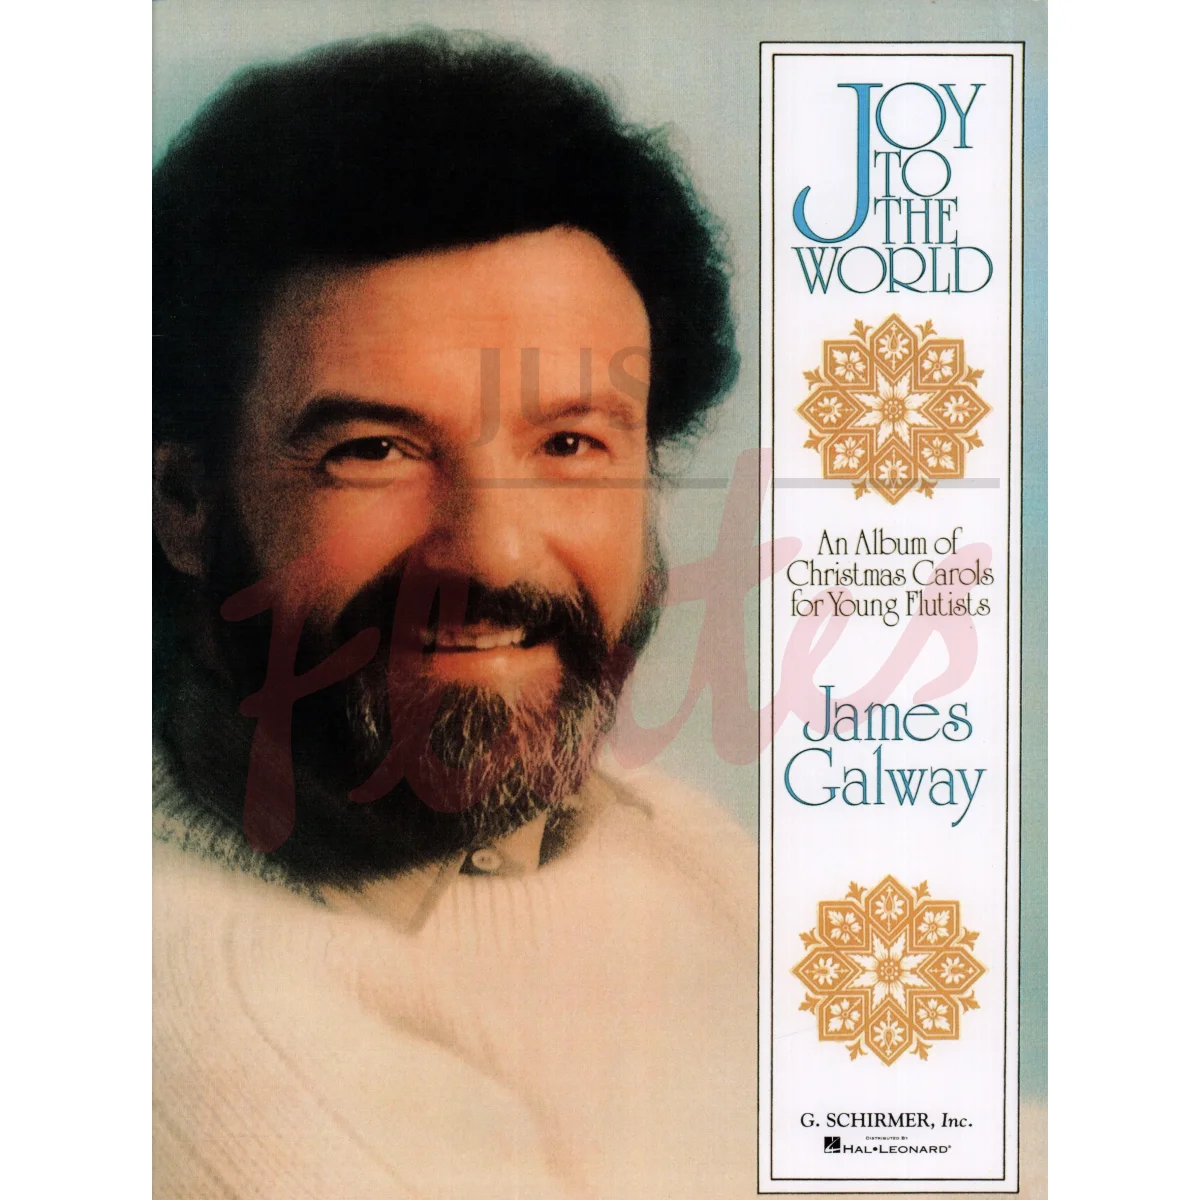 Joy To The World Album: An Album of Christmas Carols for Young Flutists